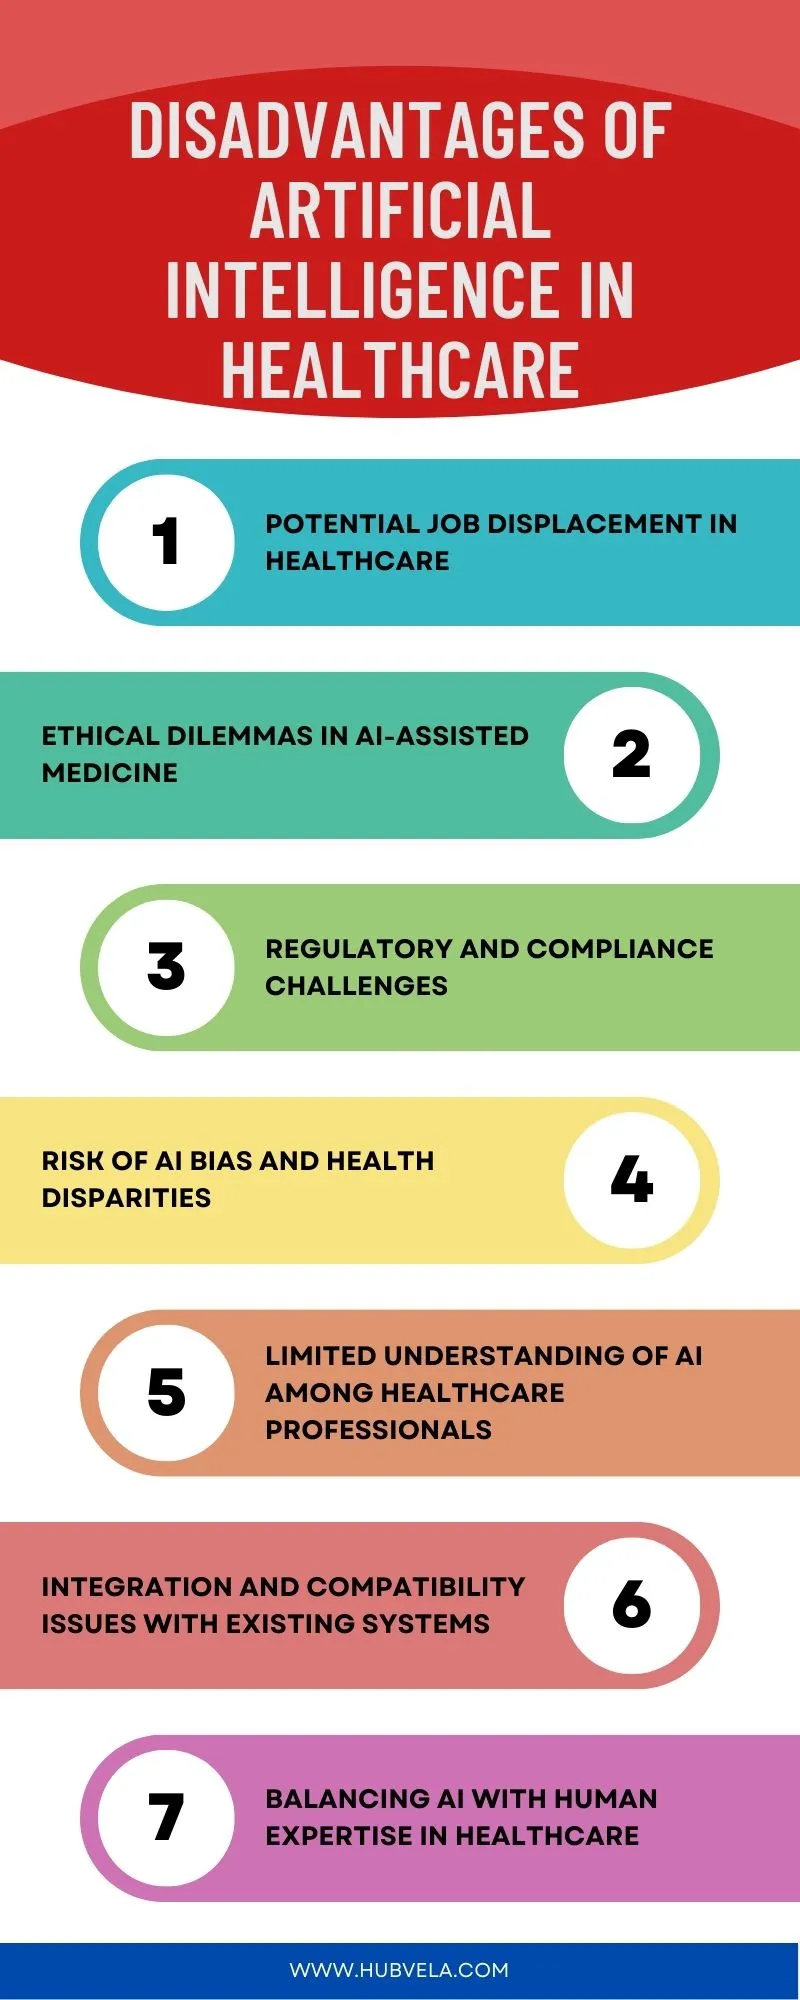 Disadvantages of Artificial Intelligence in Healthcare Infographic